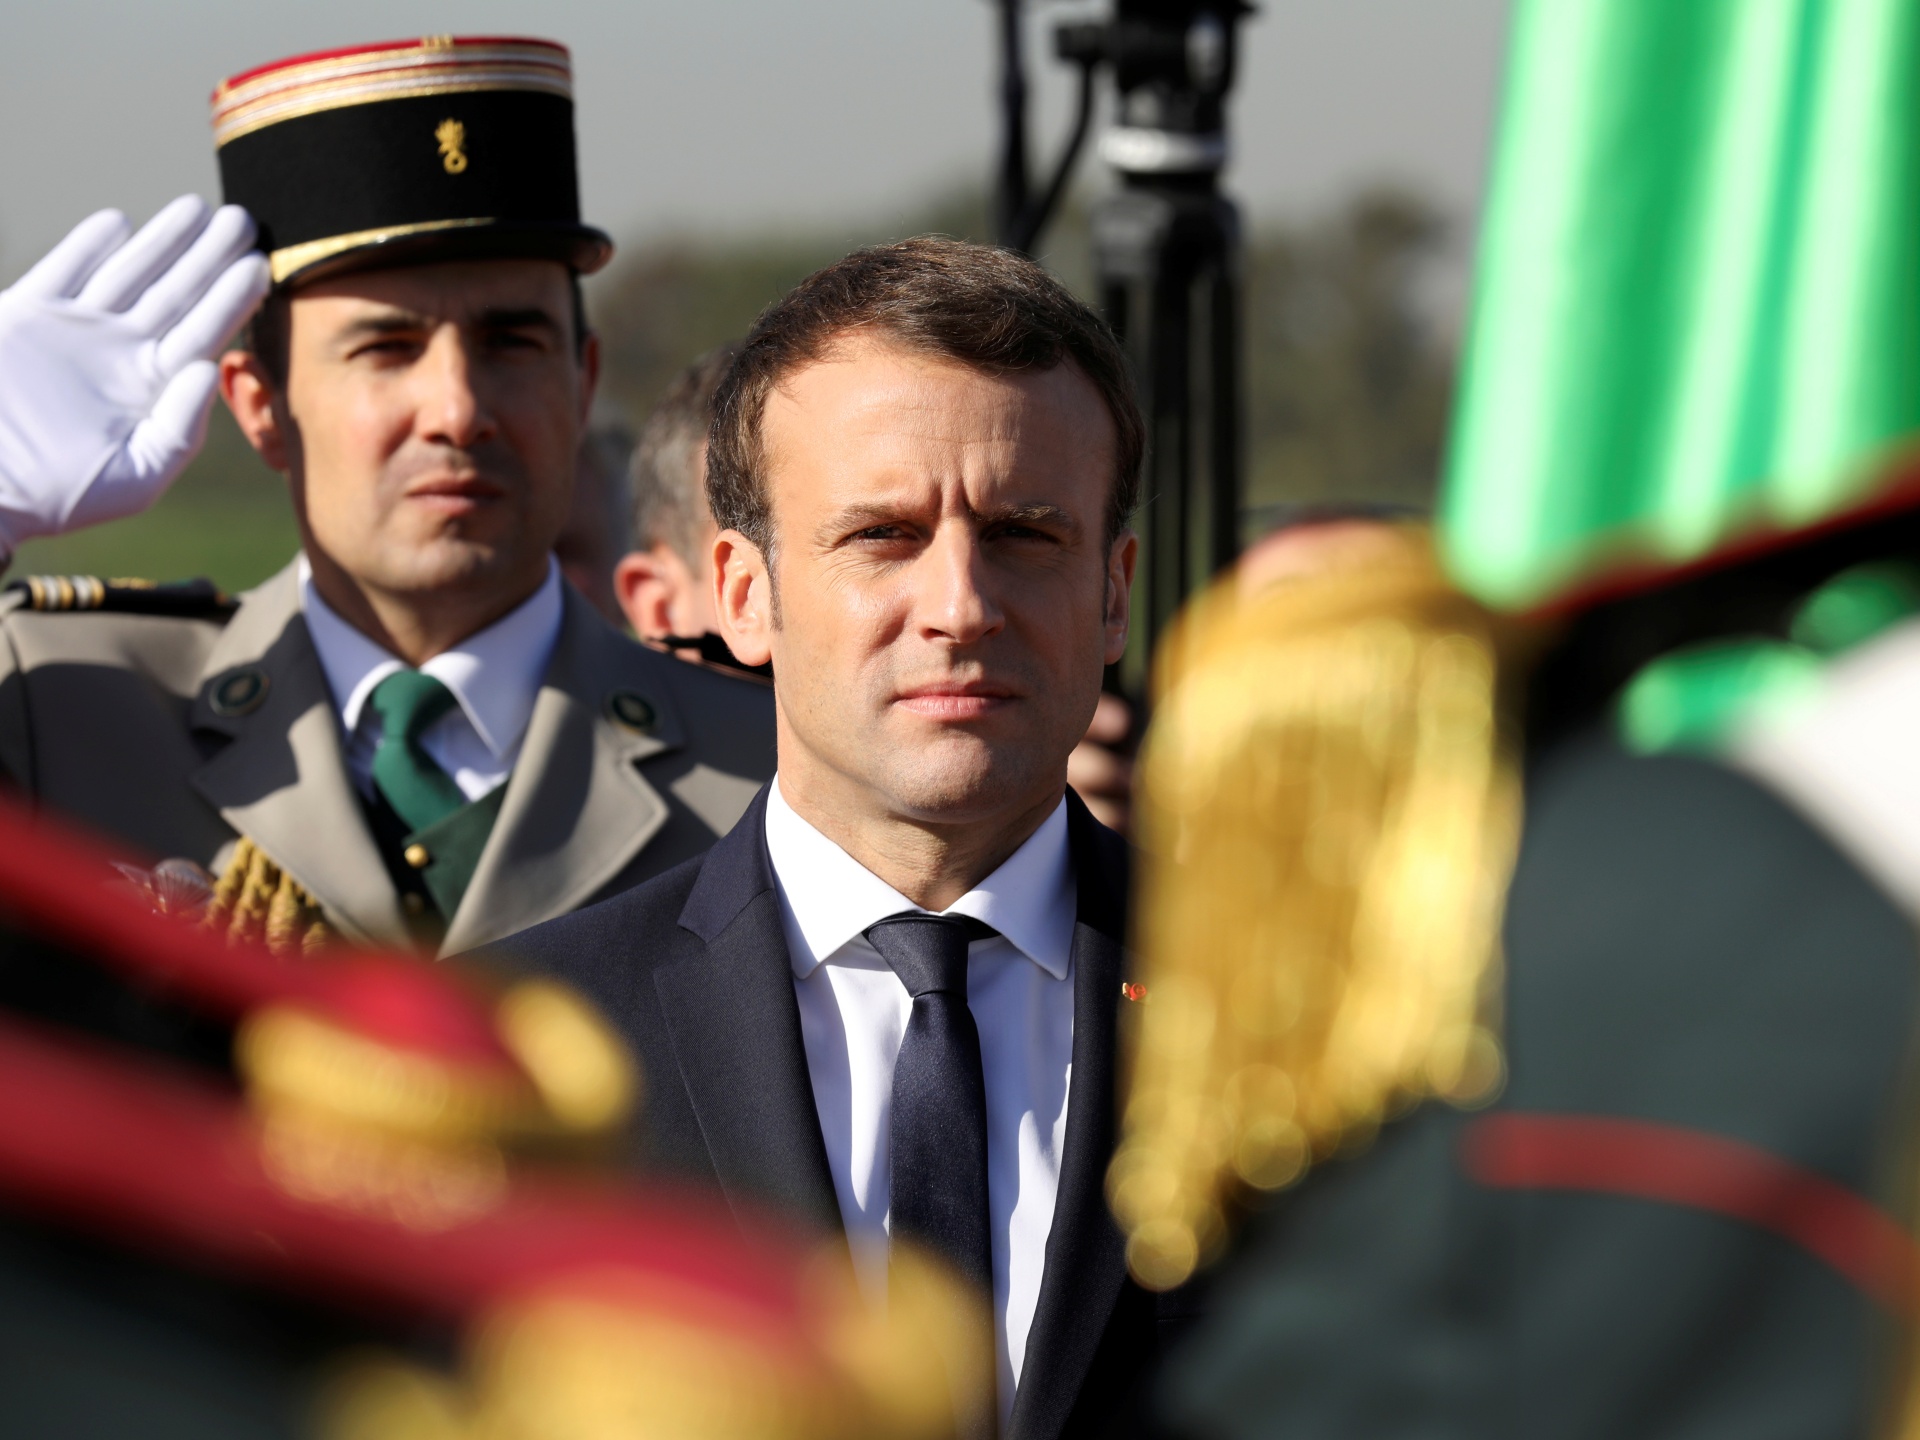 French President Macron heads to Algeria to relaunch ties